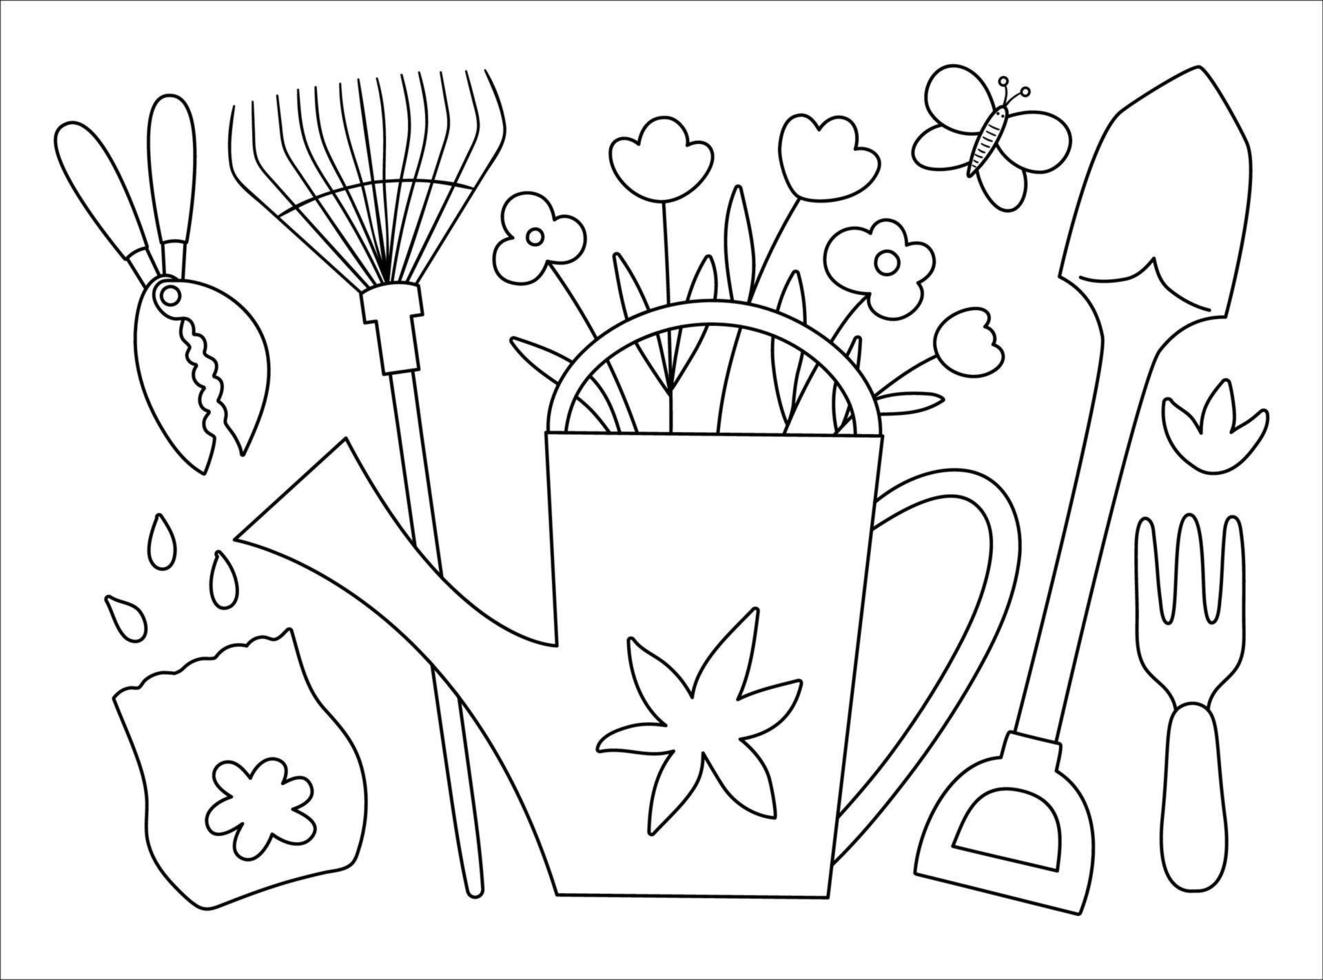 Vector black and white illustration of colorful garden tools with flowers and plants. Outline spring picture. Line watering can with flowers, rakes, seeds, butterfly. Gardening themed concept.